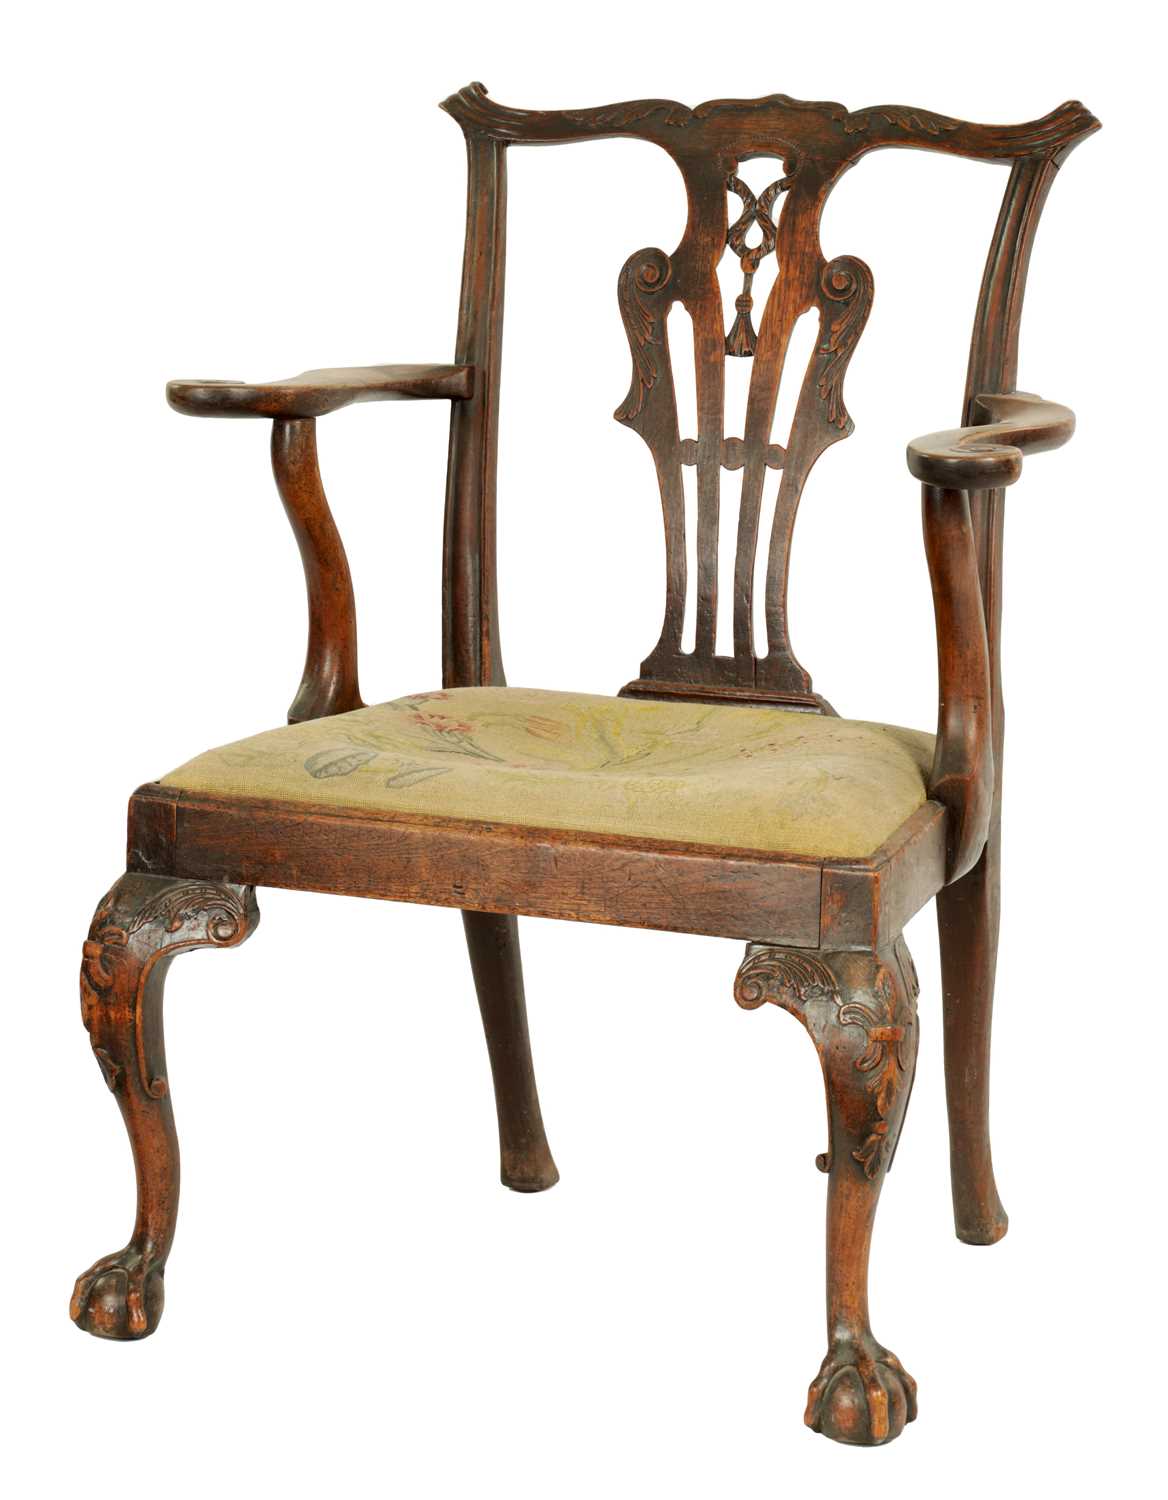 A MID 18TH CENTURY WALNUT OPEN ARMCHAIR IN THE MANNER OF CHIPPENDALE